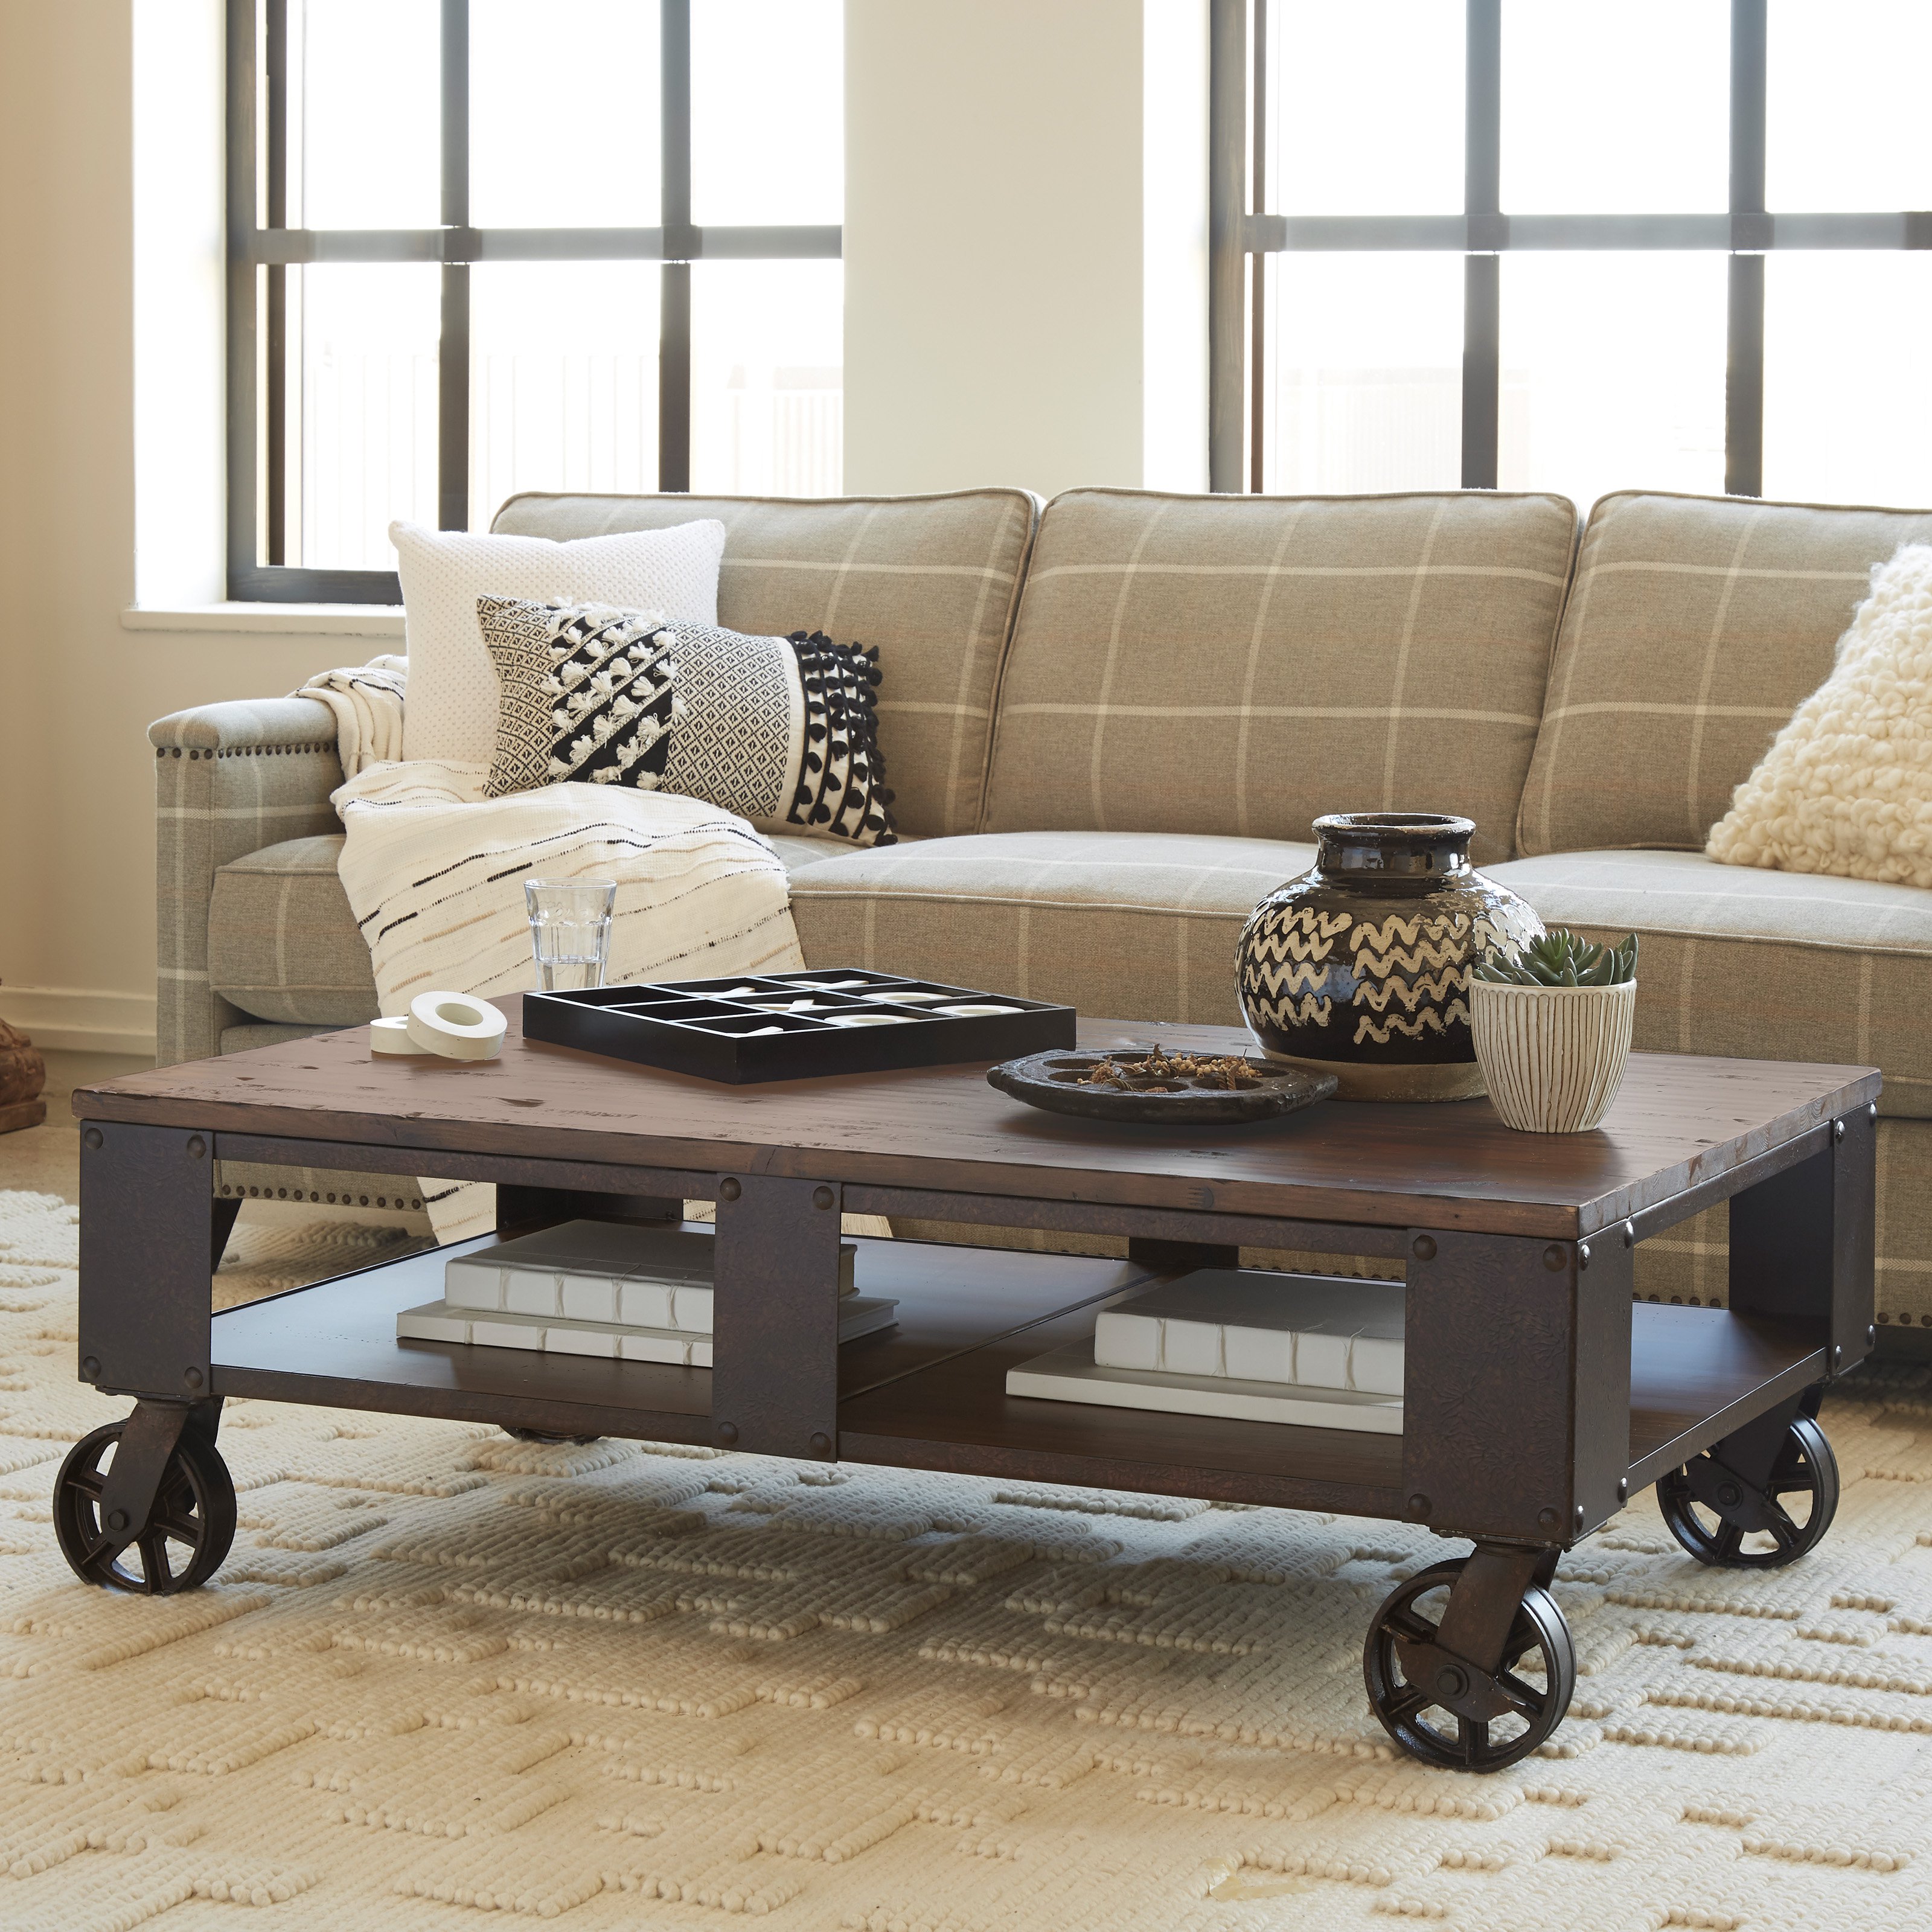 magnussen pinebrook wood rectangular coffee table with master round accent braking casters small collapsible side retro cabinet vintage couch styles grey bookshelf unique wine